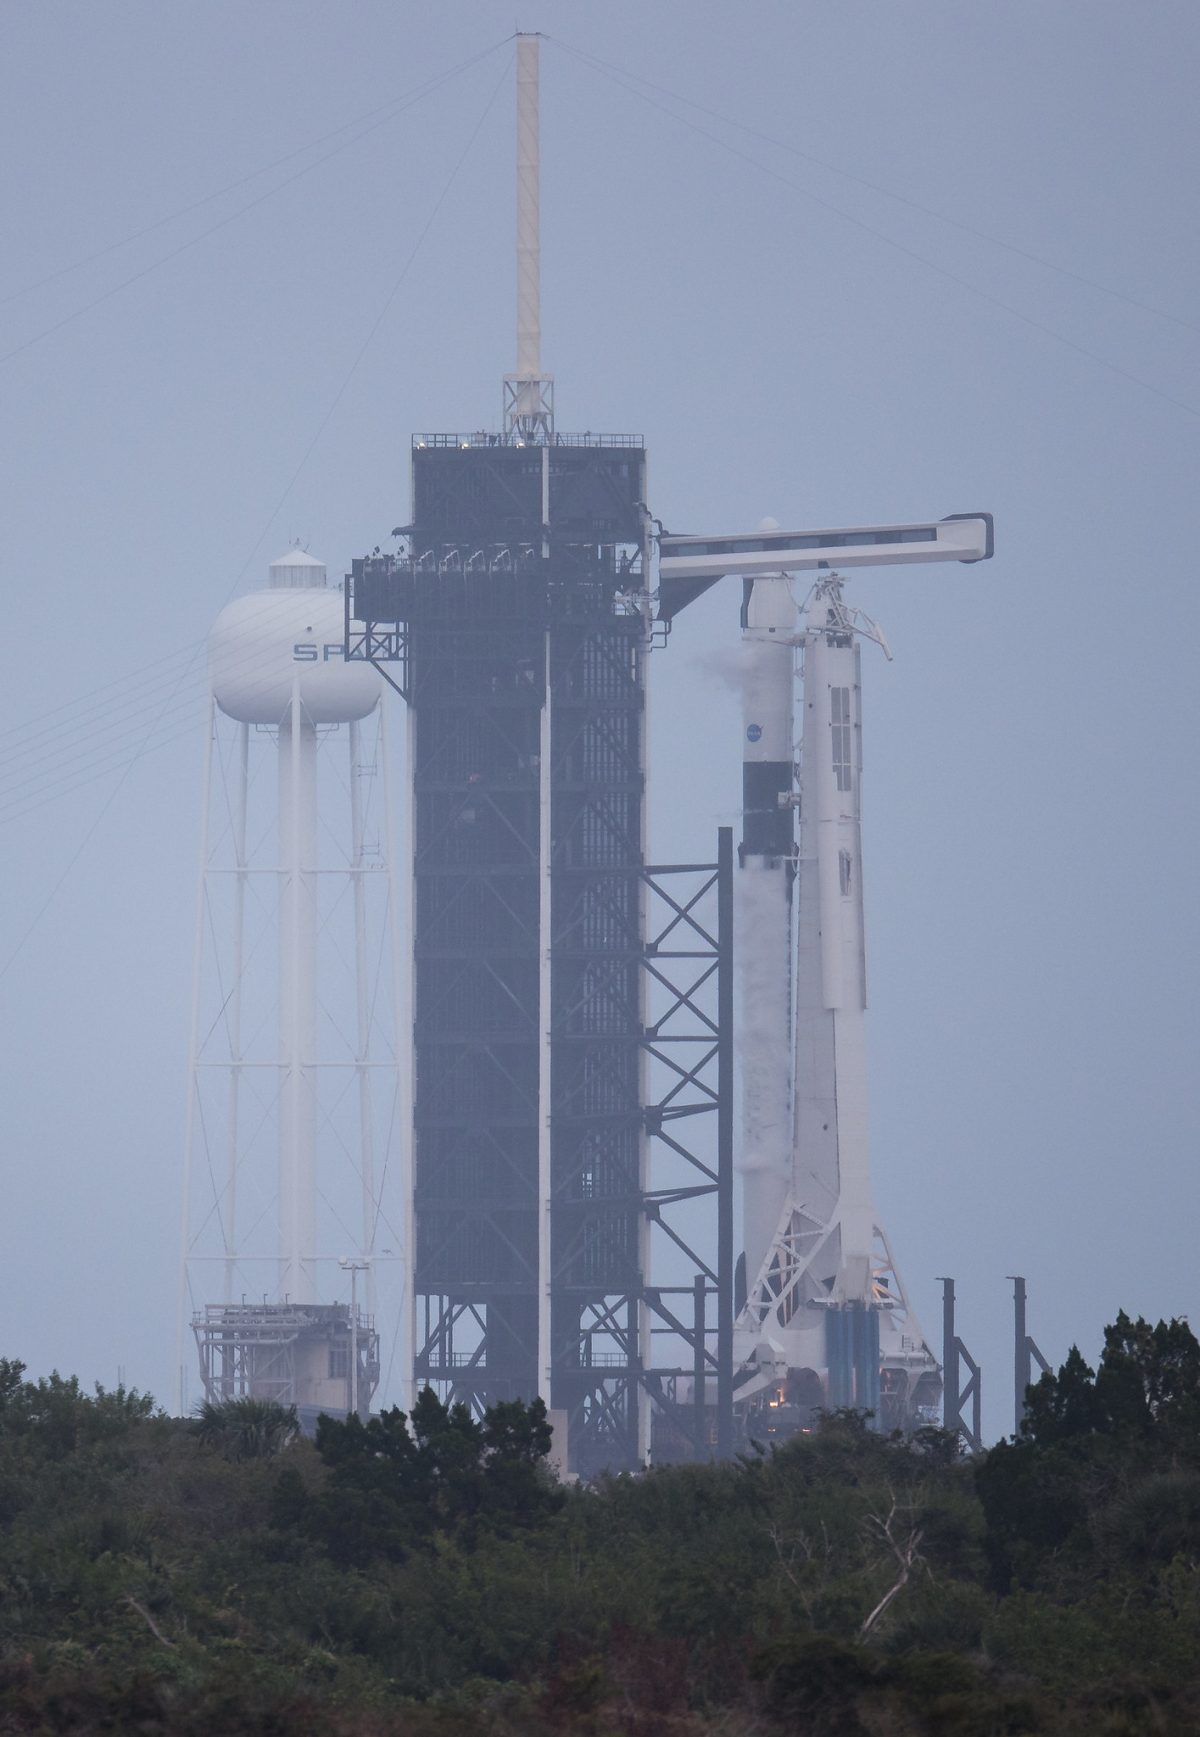 Almost ready to light this candle: The Falcon 9 on the launchpad, November 14, 2020.  (Image: NASA/Joel Kowsky)